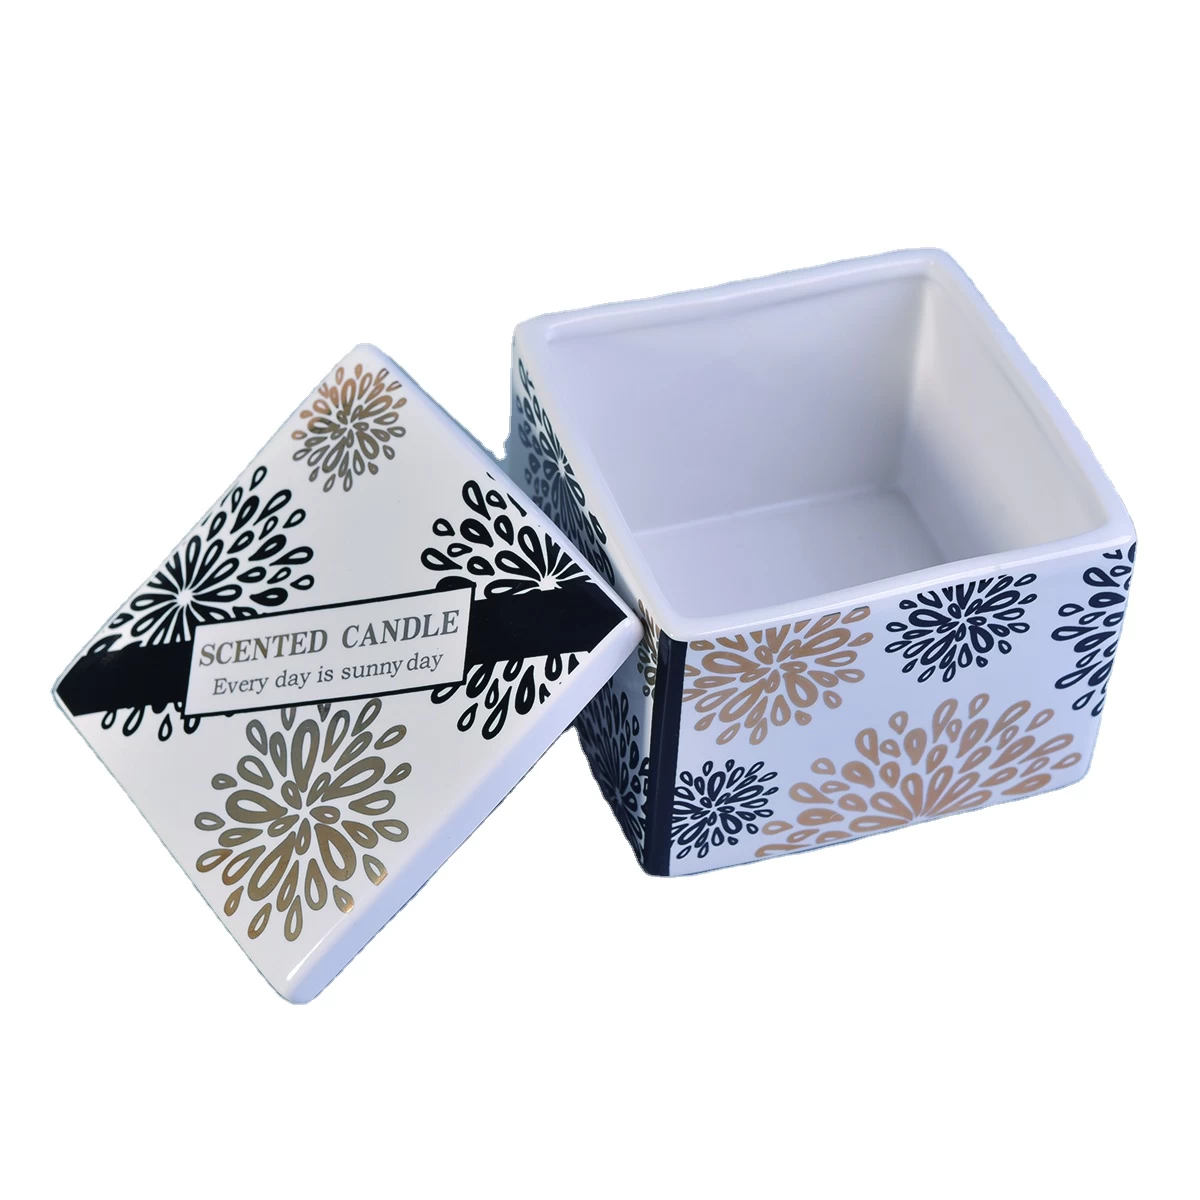 10oz 12oz luxury square tealight ceramic candle holder with lid